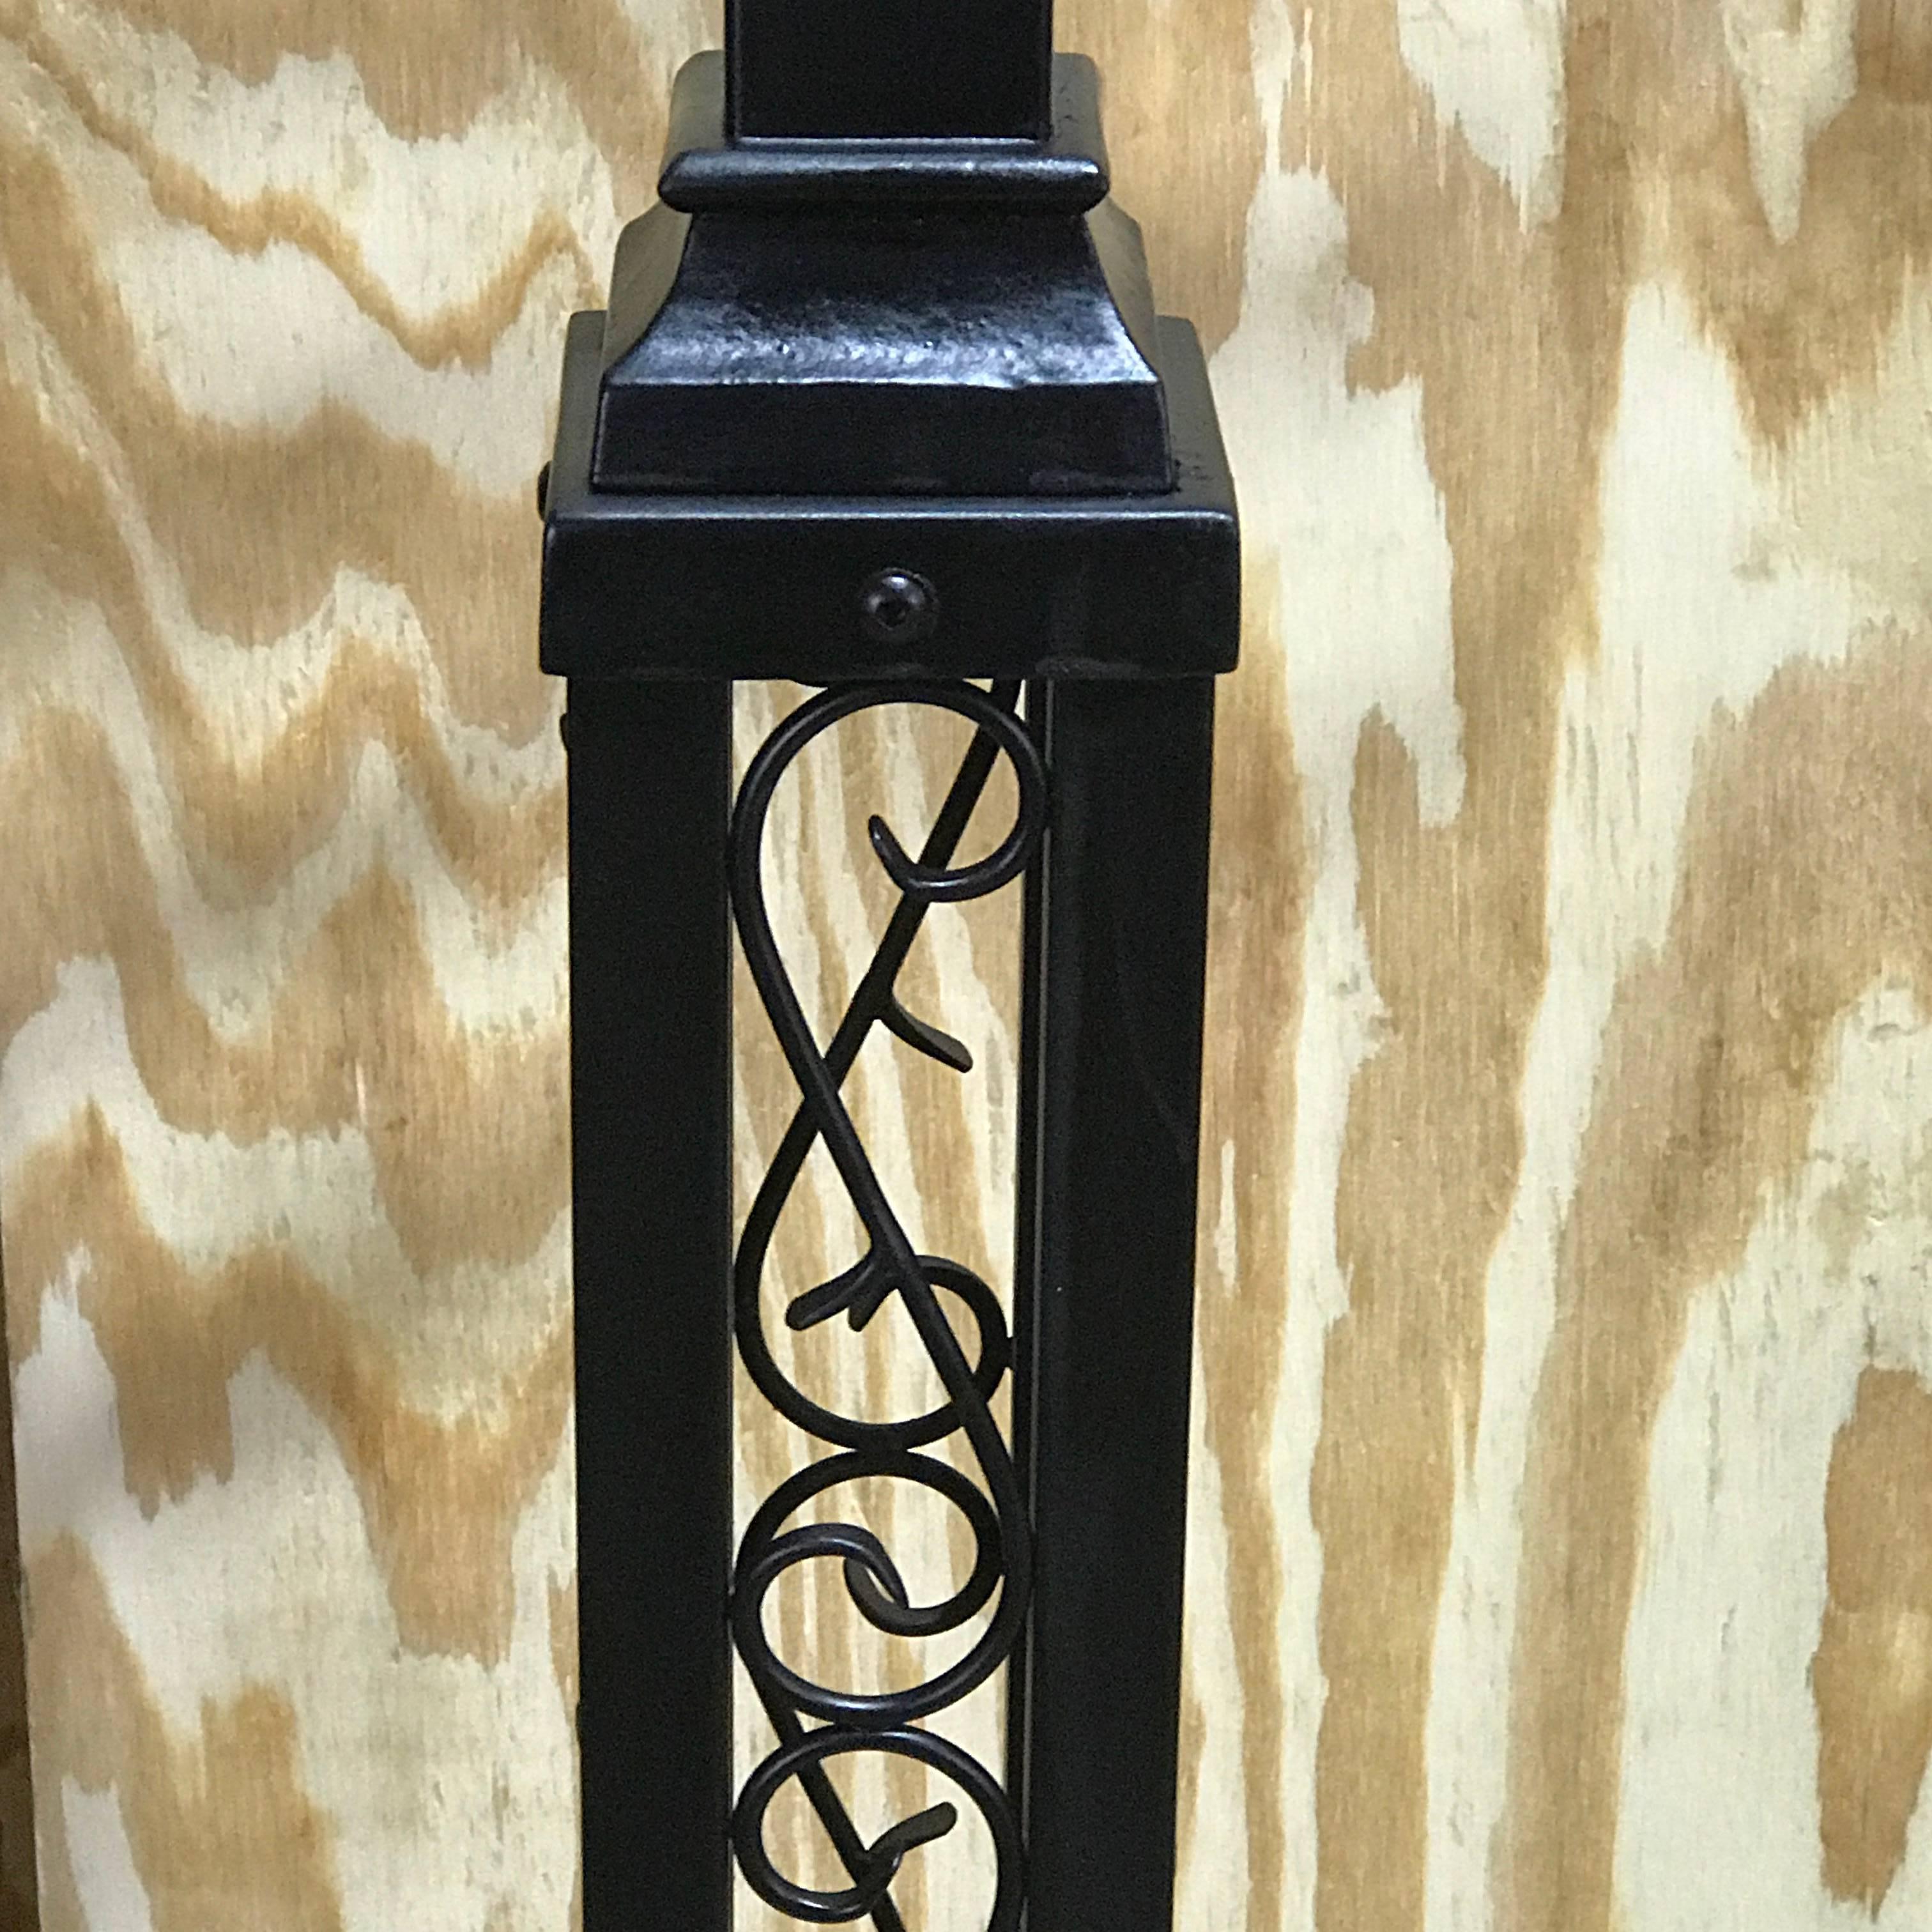 Late Victorian Victorian Style Wrought Iron Lamp Post Hanging Planter, from Walt Disney World